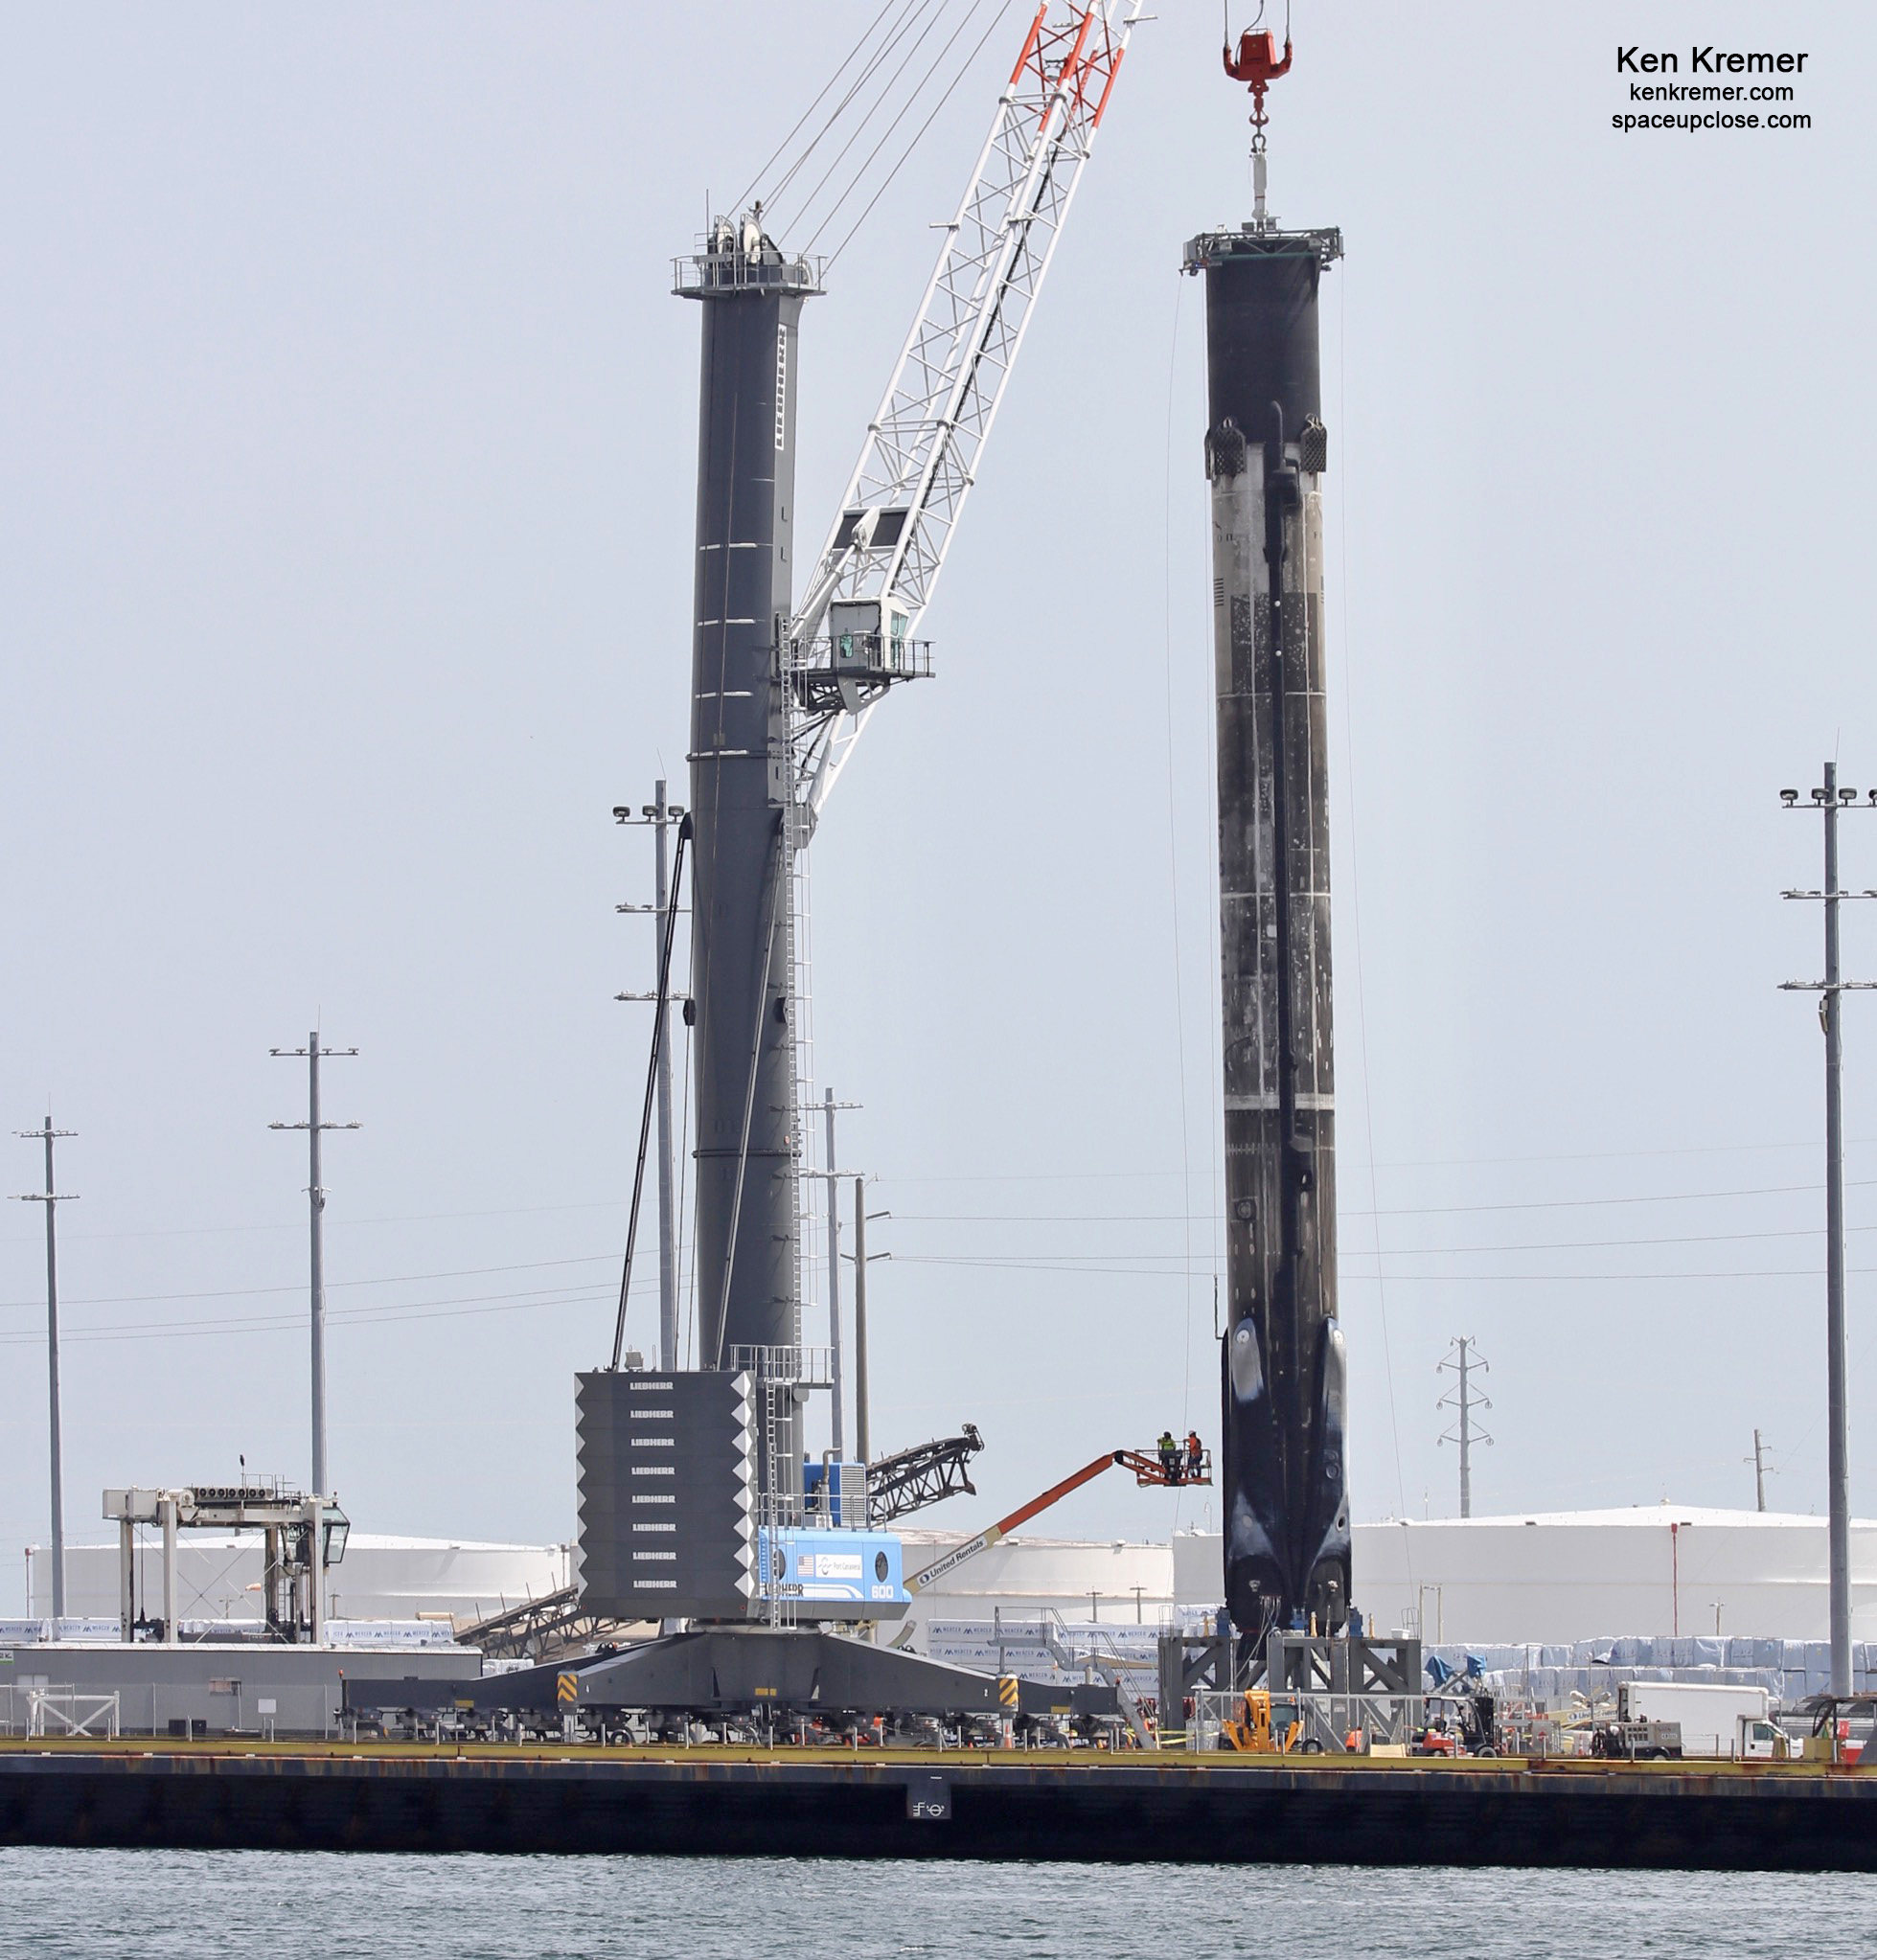 All Legs Retracted on 6x Flown SpaceX Falcon 9, Goes Horizontal and Returns to Cape: Photos